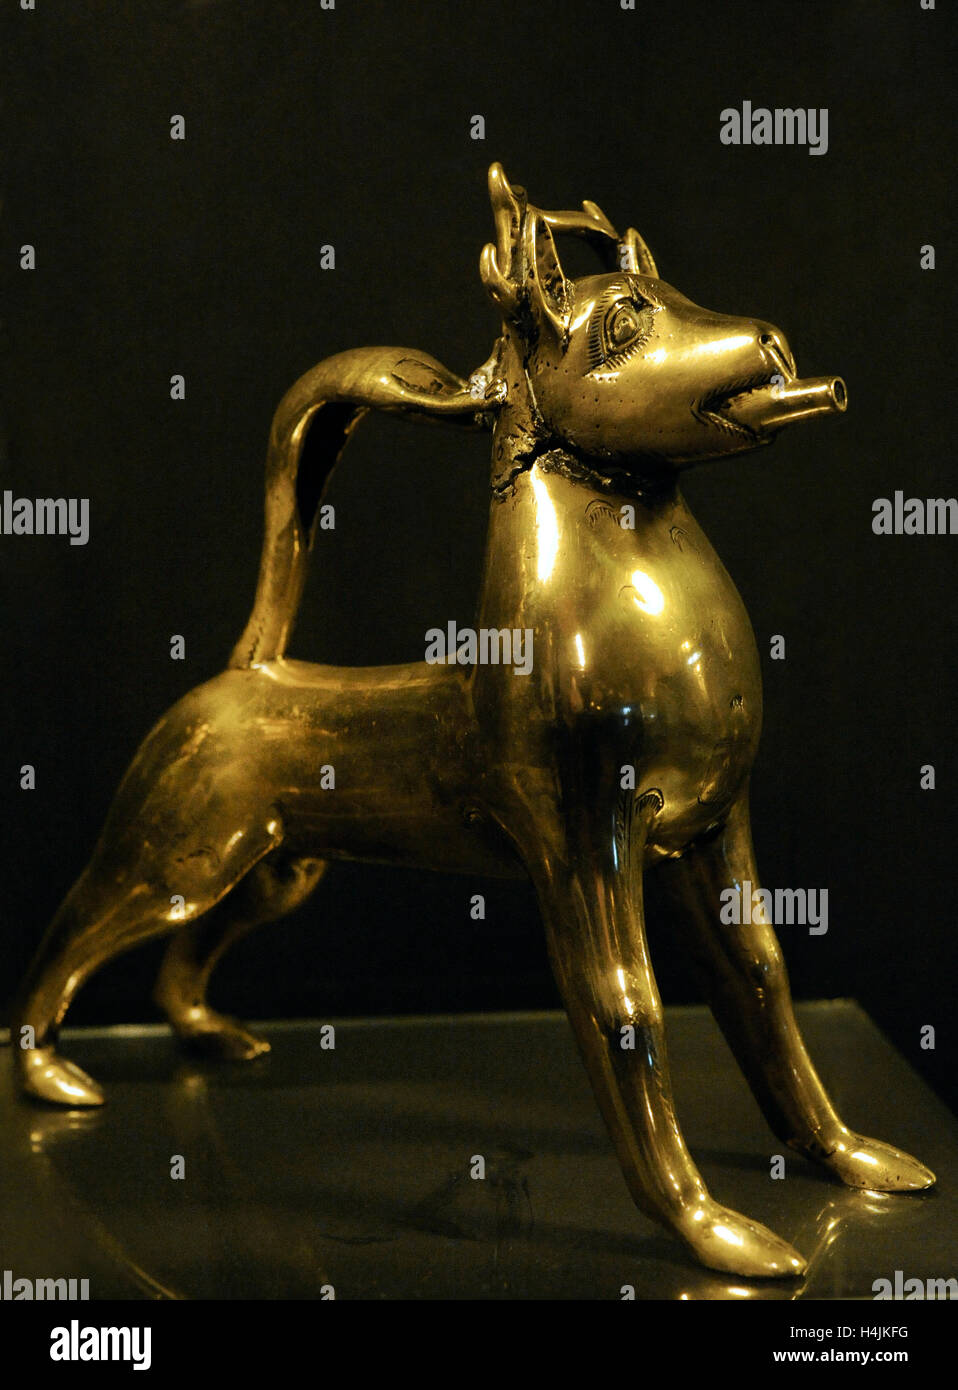 Aquamanile in the form of a fantastic animal. Brass. Hogetveit, VInje, Telemark. ca. 1300. Historical Museum. Oslo. Norway. Stock Photo